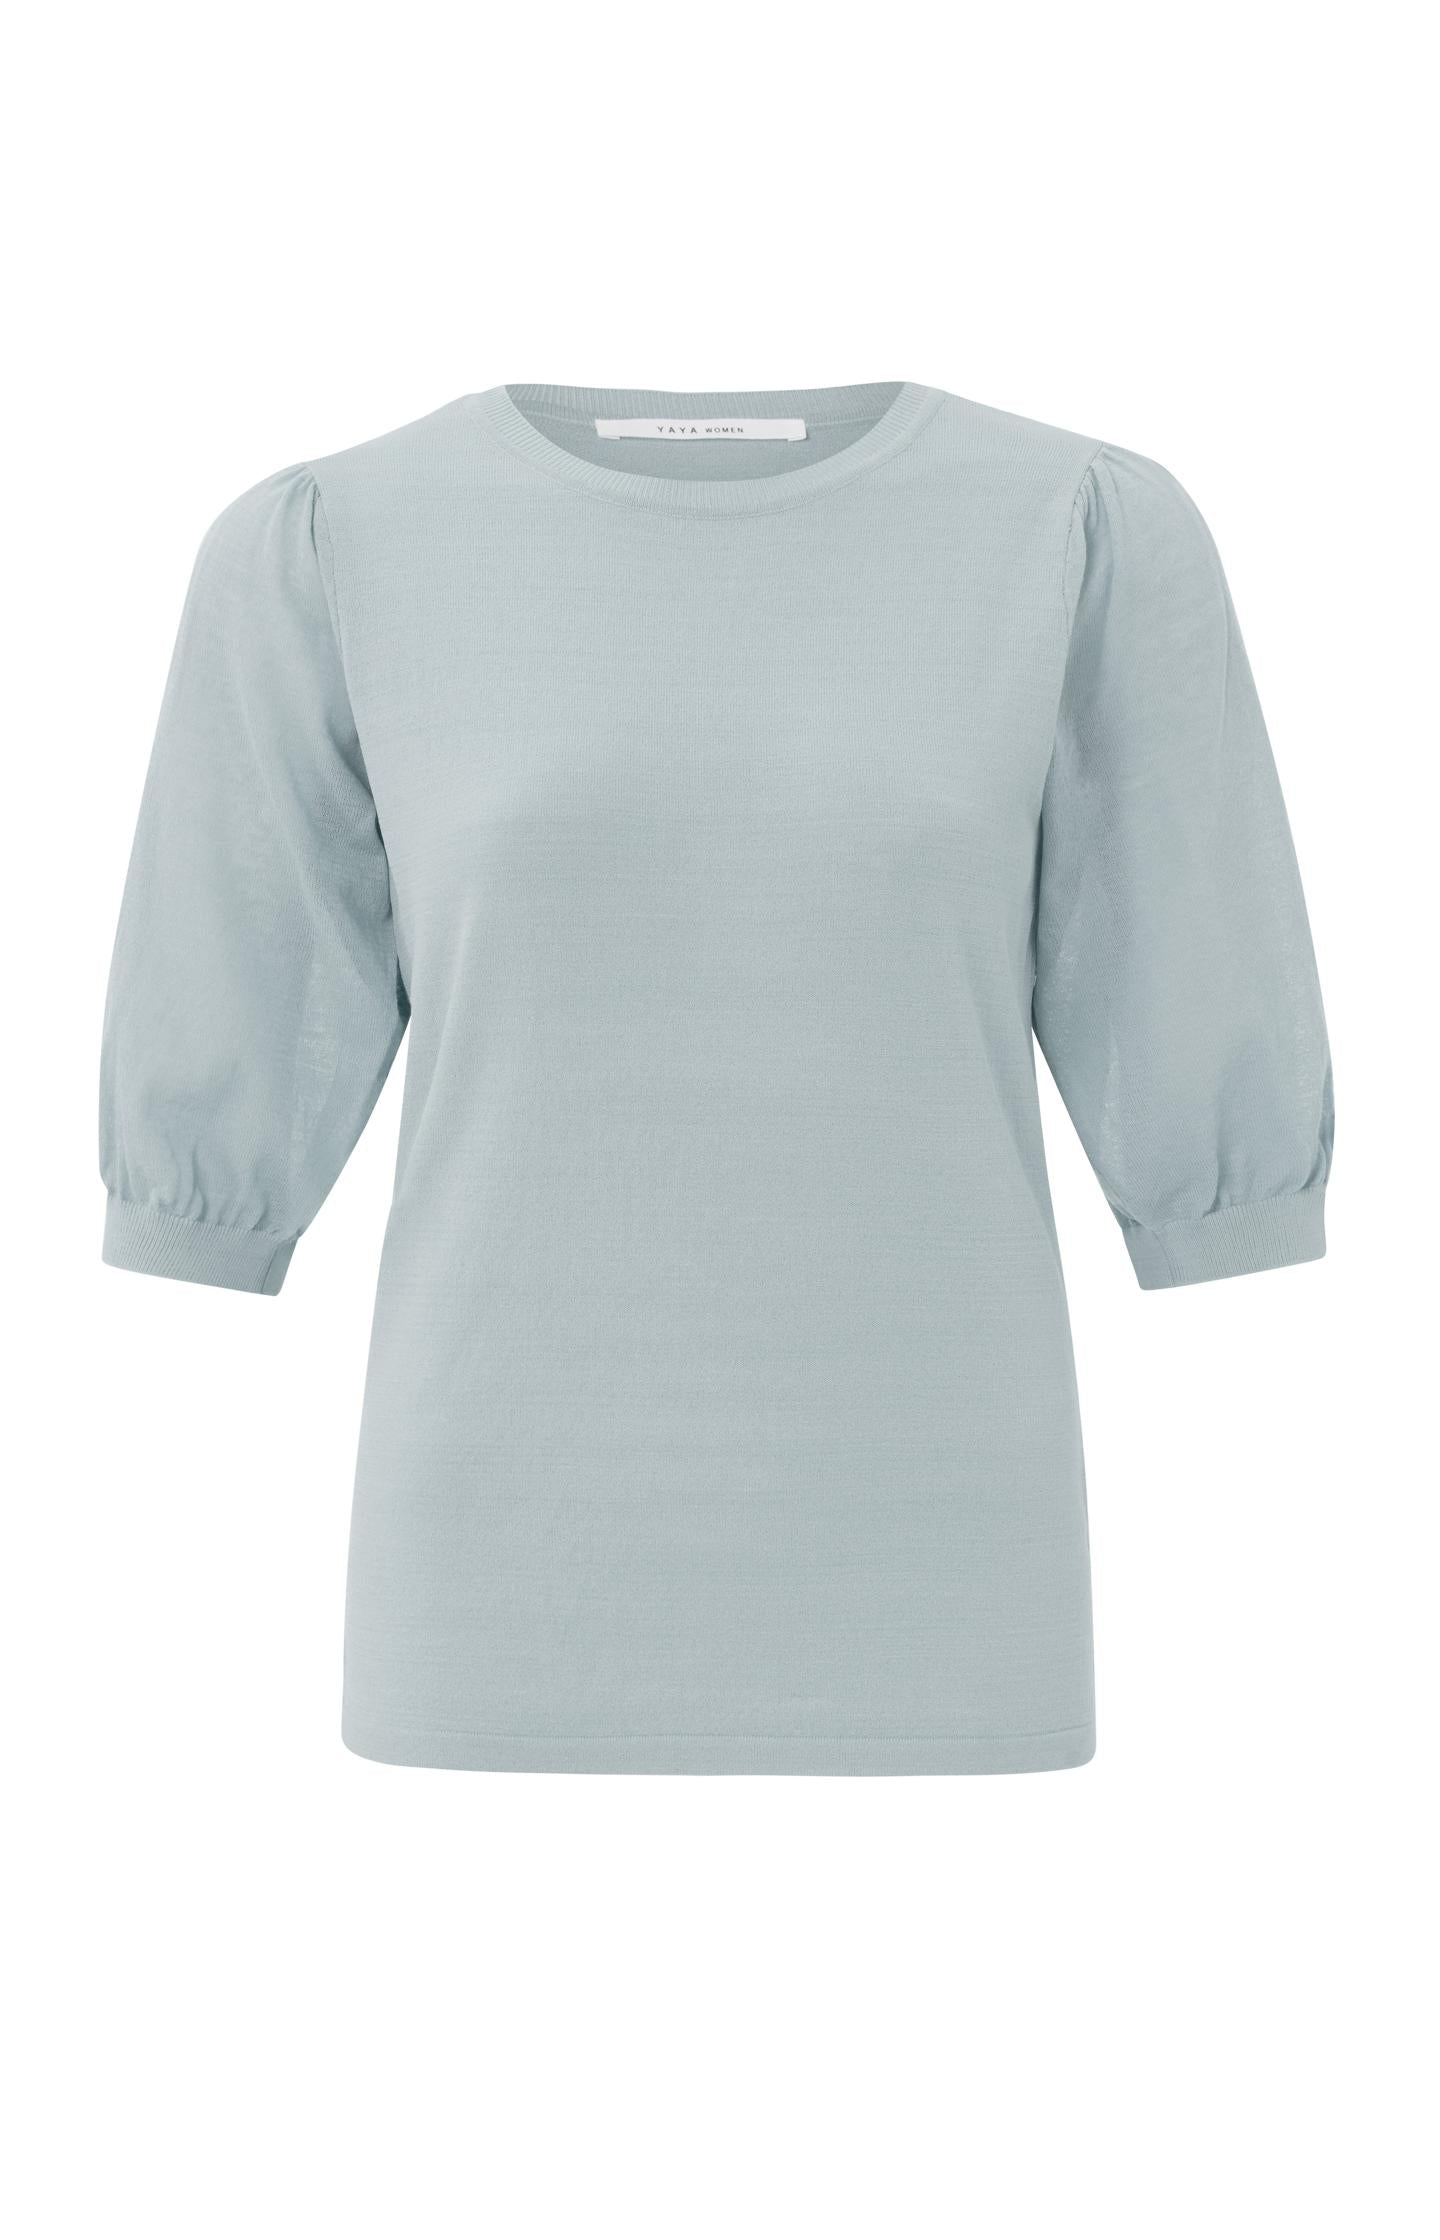 Sweater with round neck and mid-length puff sleeves - Type: product